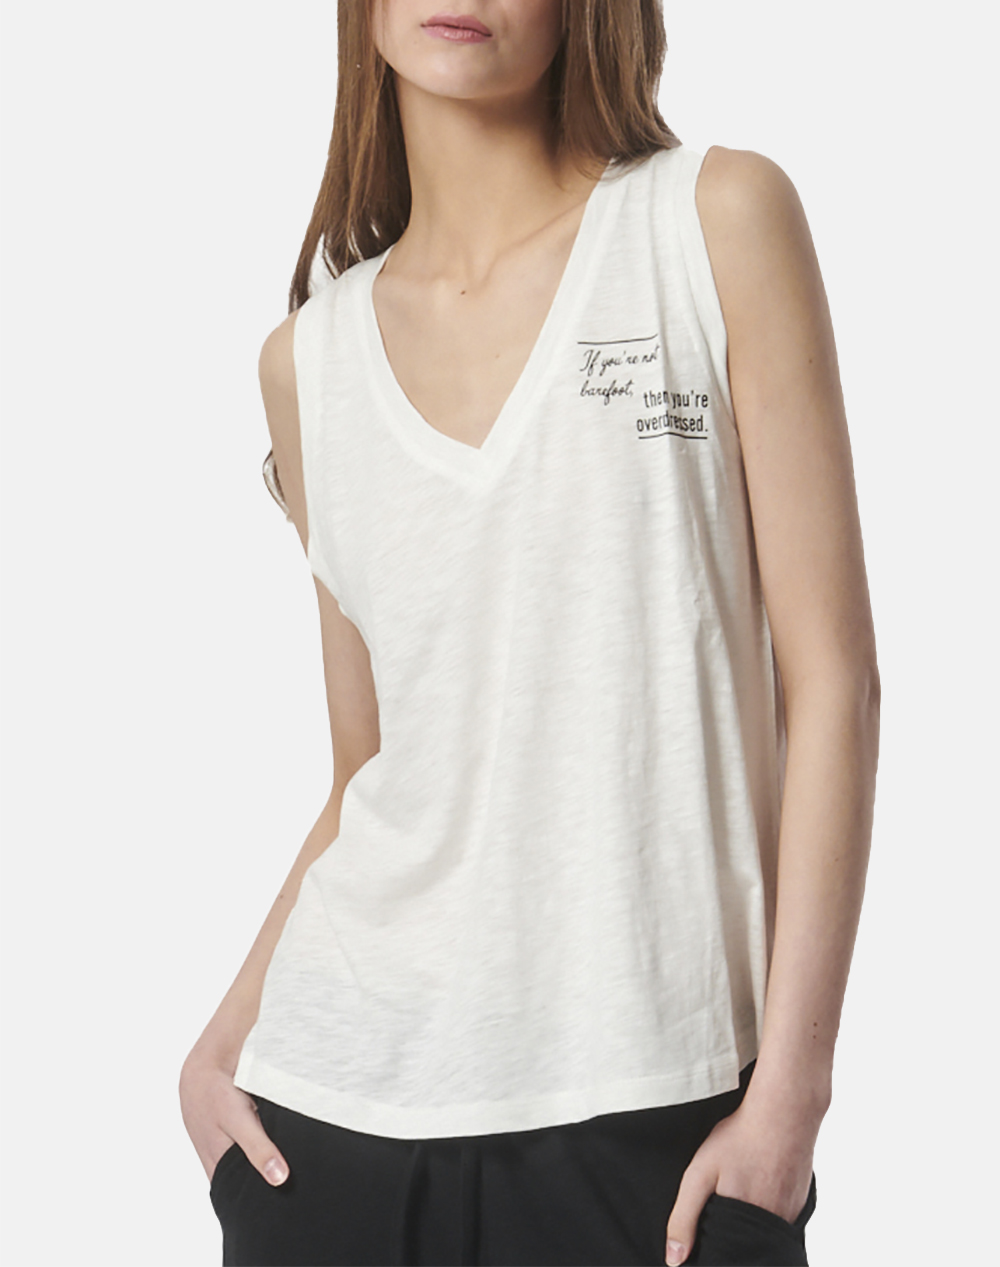 BODY ACTION WOMEN”S TEXTURED V-NECK TANK TOP 041421-01-OFF WHITE OffWhite